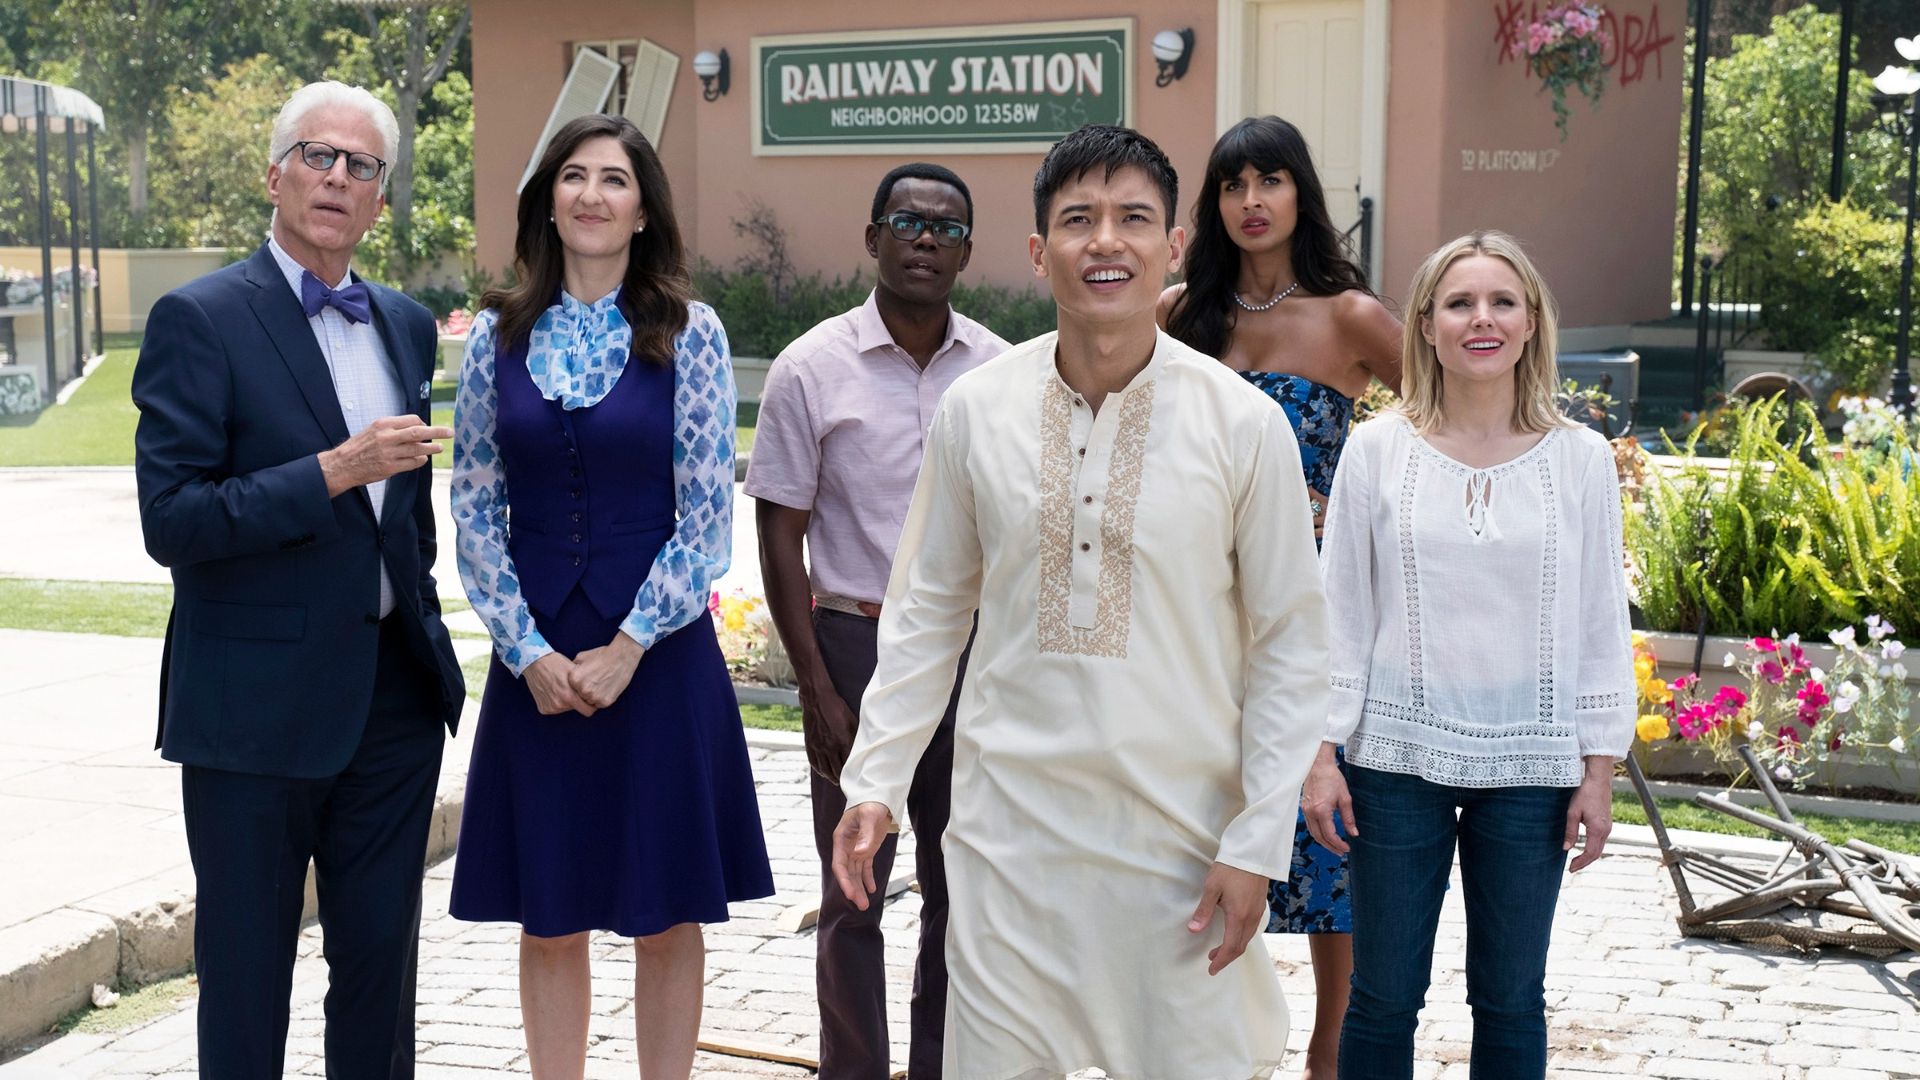 Good Place - One of the best Netflix shows you can watch right now